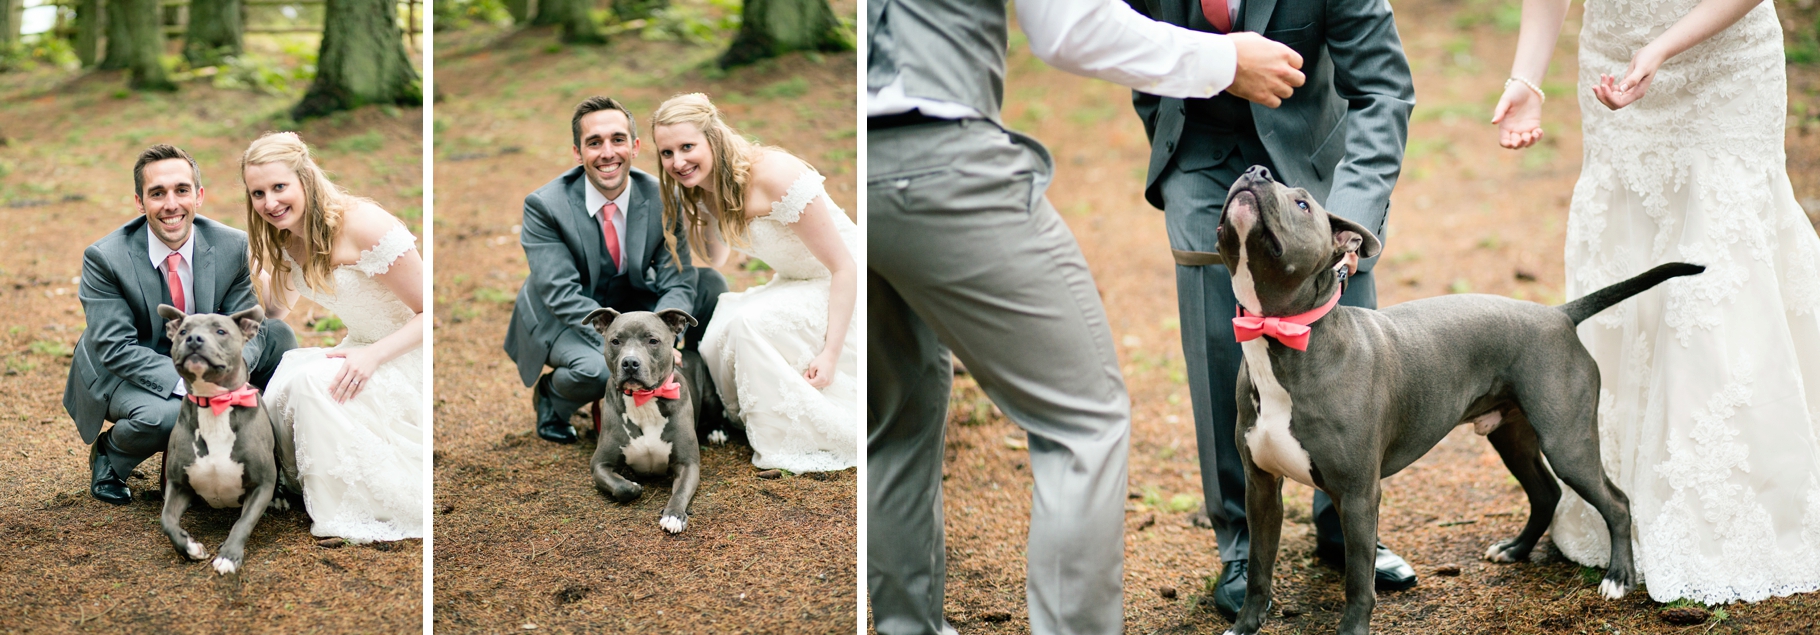 48-Bride-Groom-Portraits-Dog-Family-wooded-bluff-olympic-mountains-log-cabin-Kitsap-Memorial-State-Park-Forest-Northwest-Photographer-Seattle-Wedding-Photography-by-Betty-Elaine